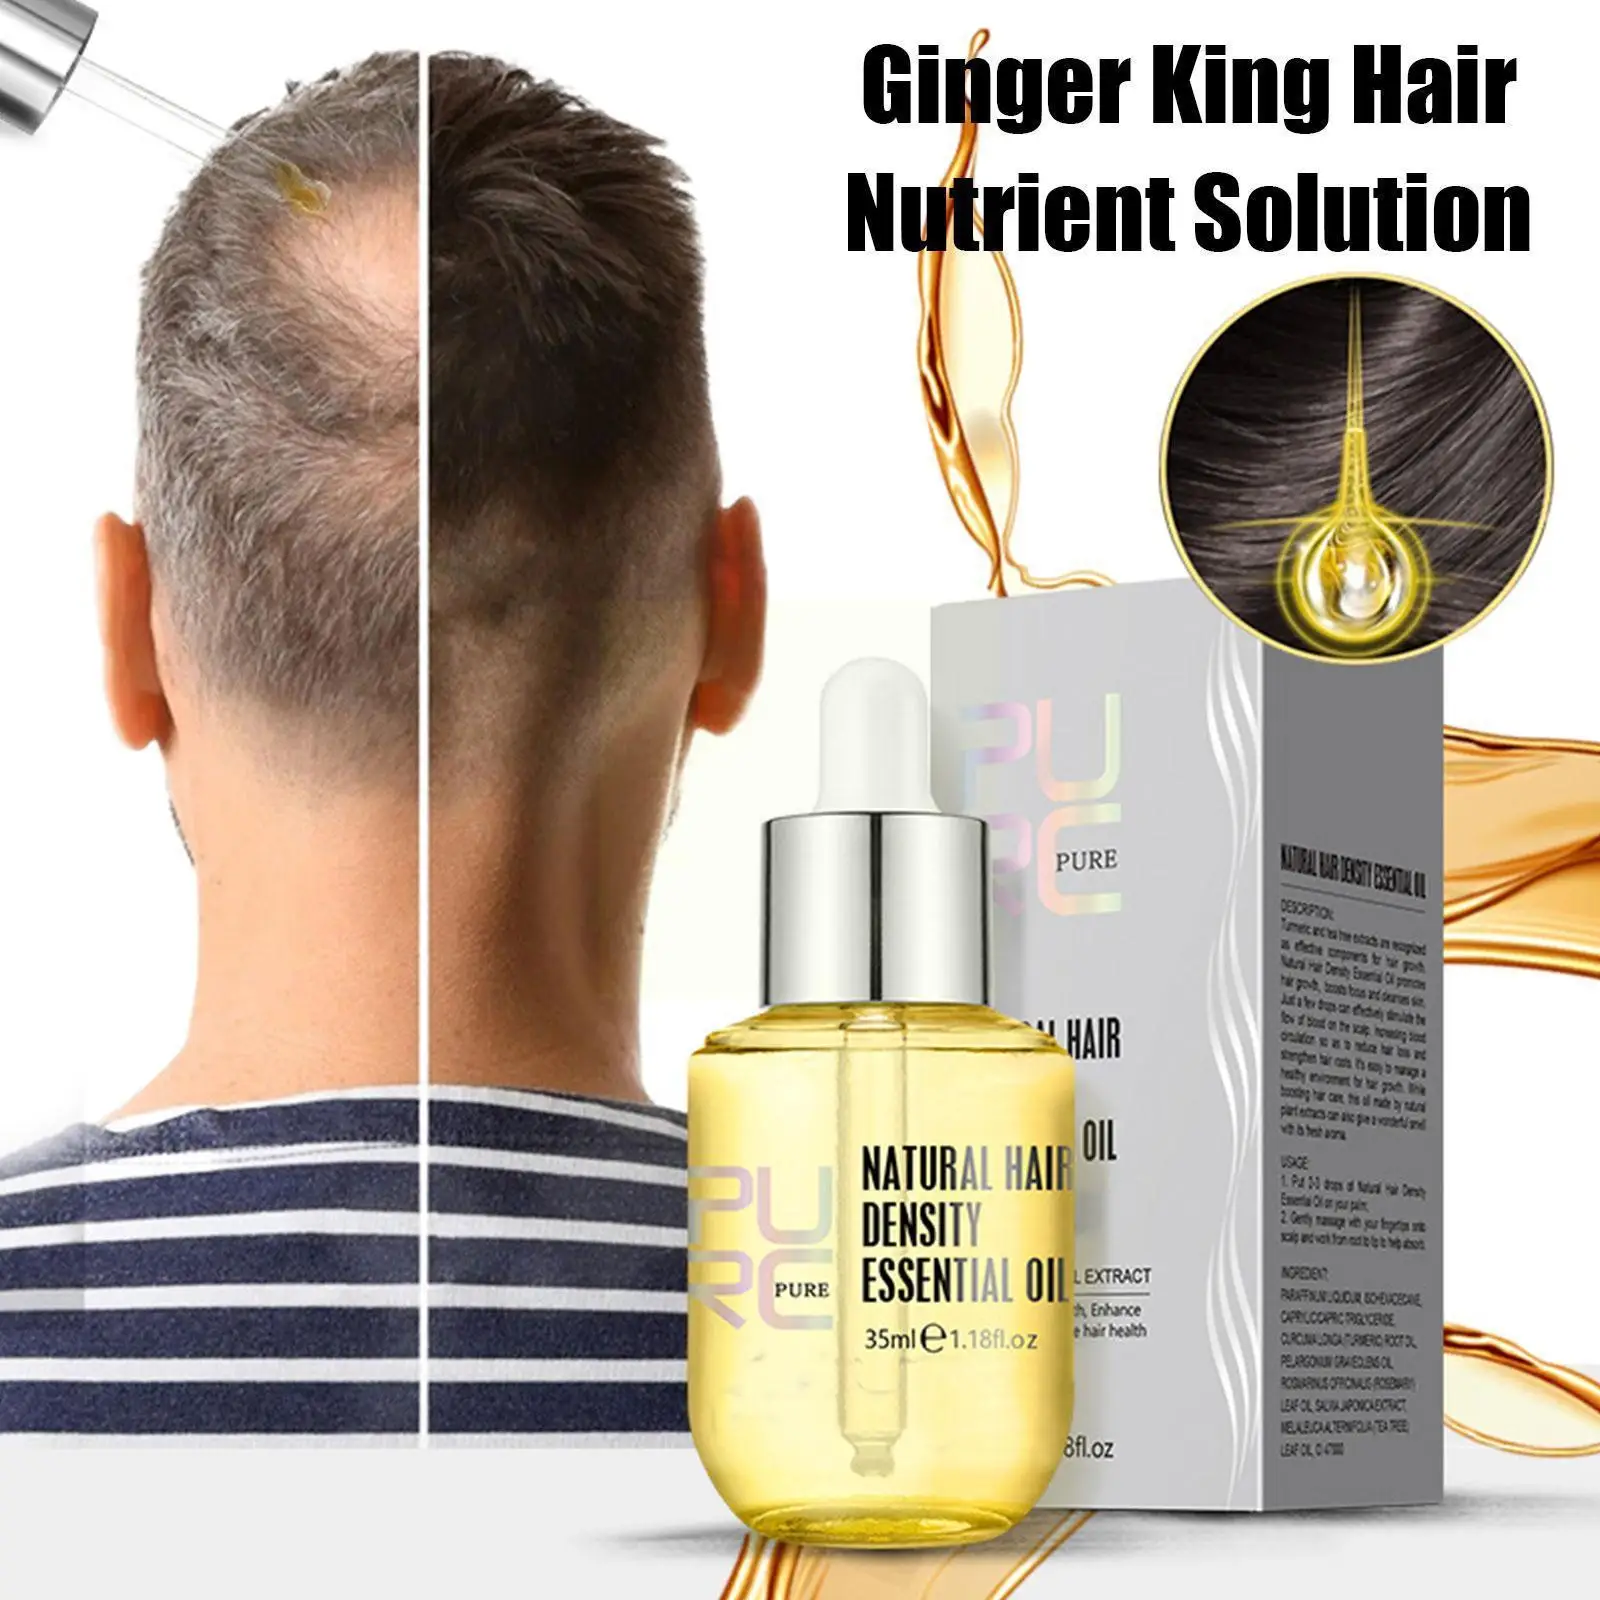 

1PCS 35ml Ginger Essence for hair growth Oil Men Women Thickening Grow Hair Treatment Products Dropshipping S2F3